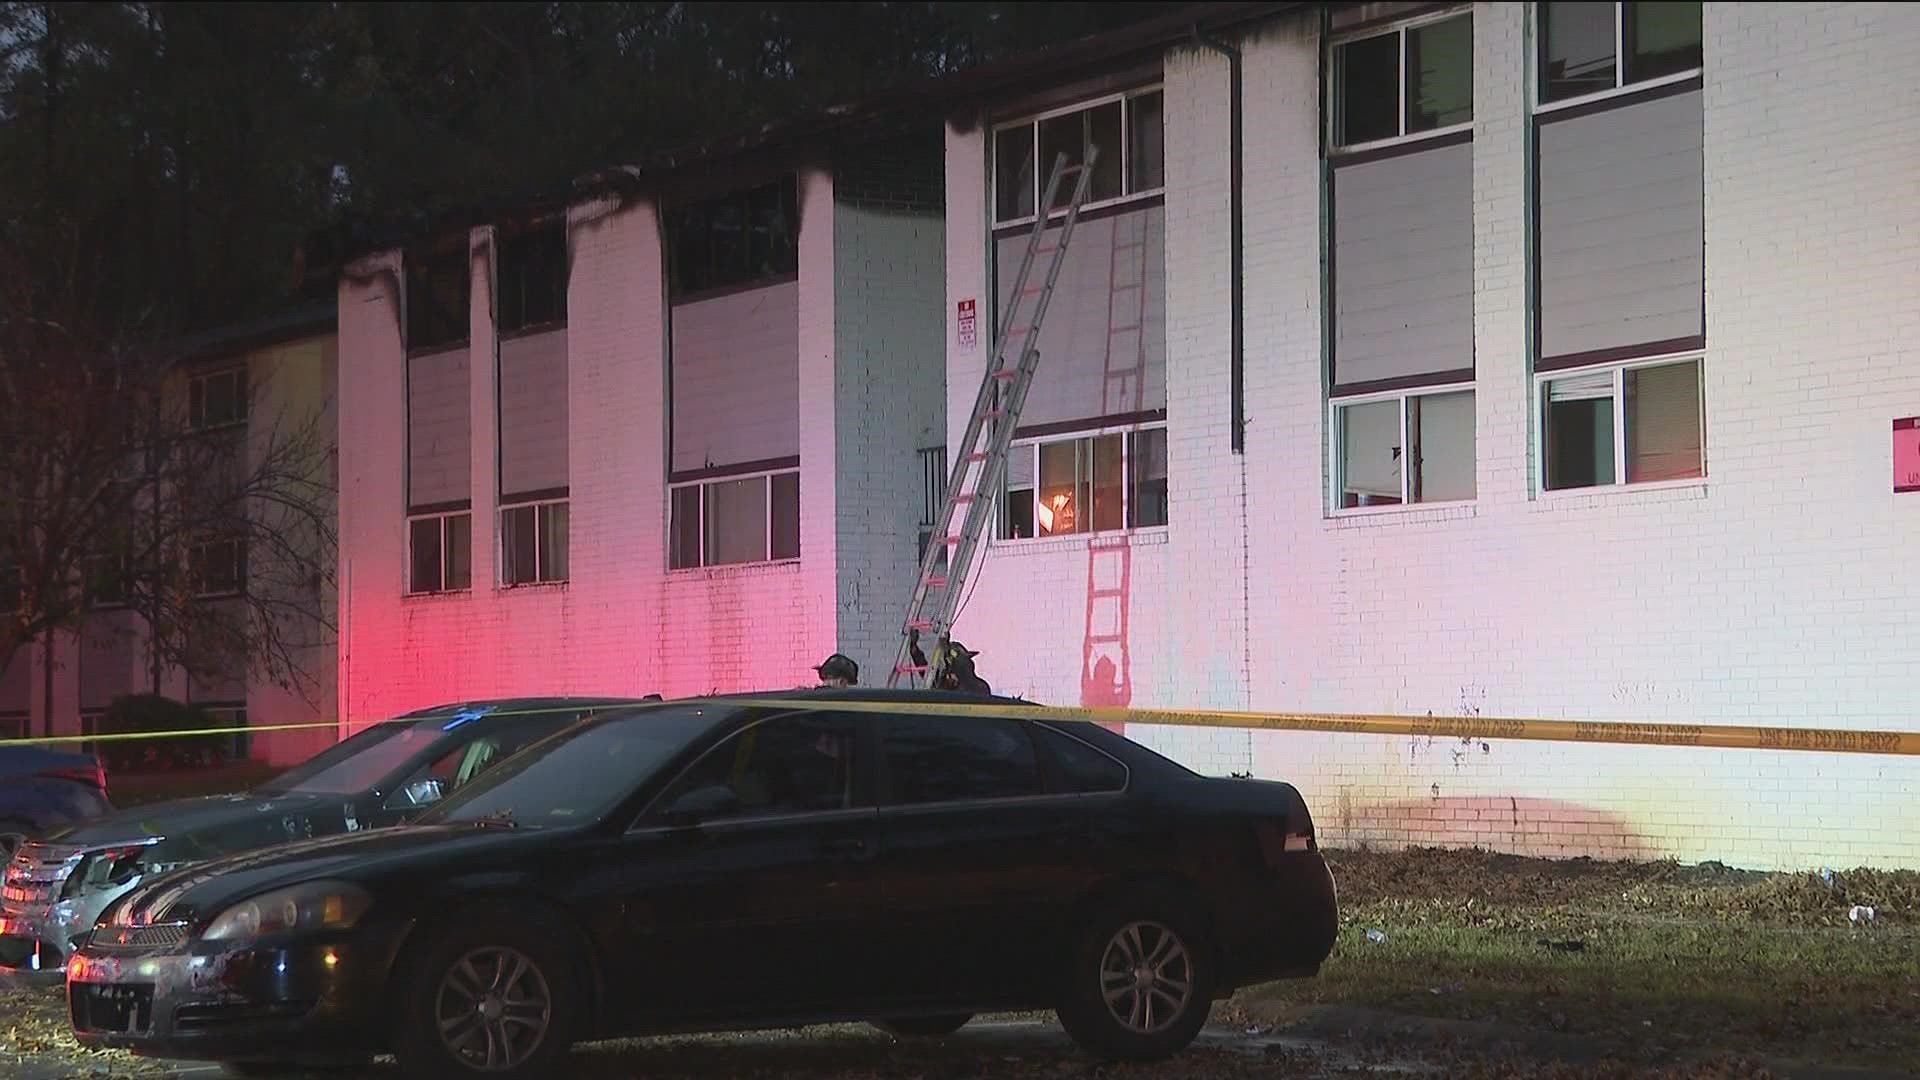 She said her son woke her up around 4 a.m. Monday when the fire started inside her apartment off Glenwood Road in Decatur.